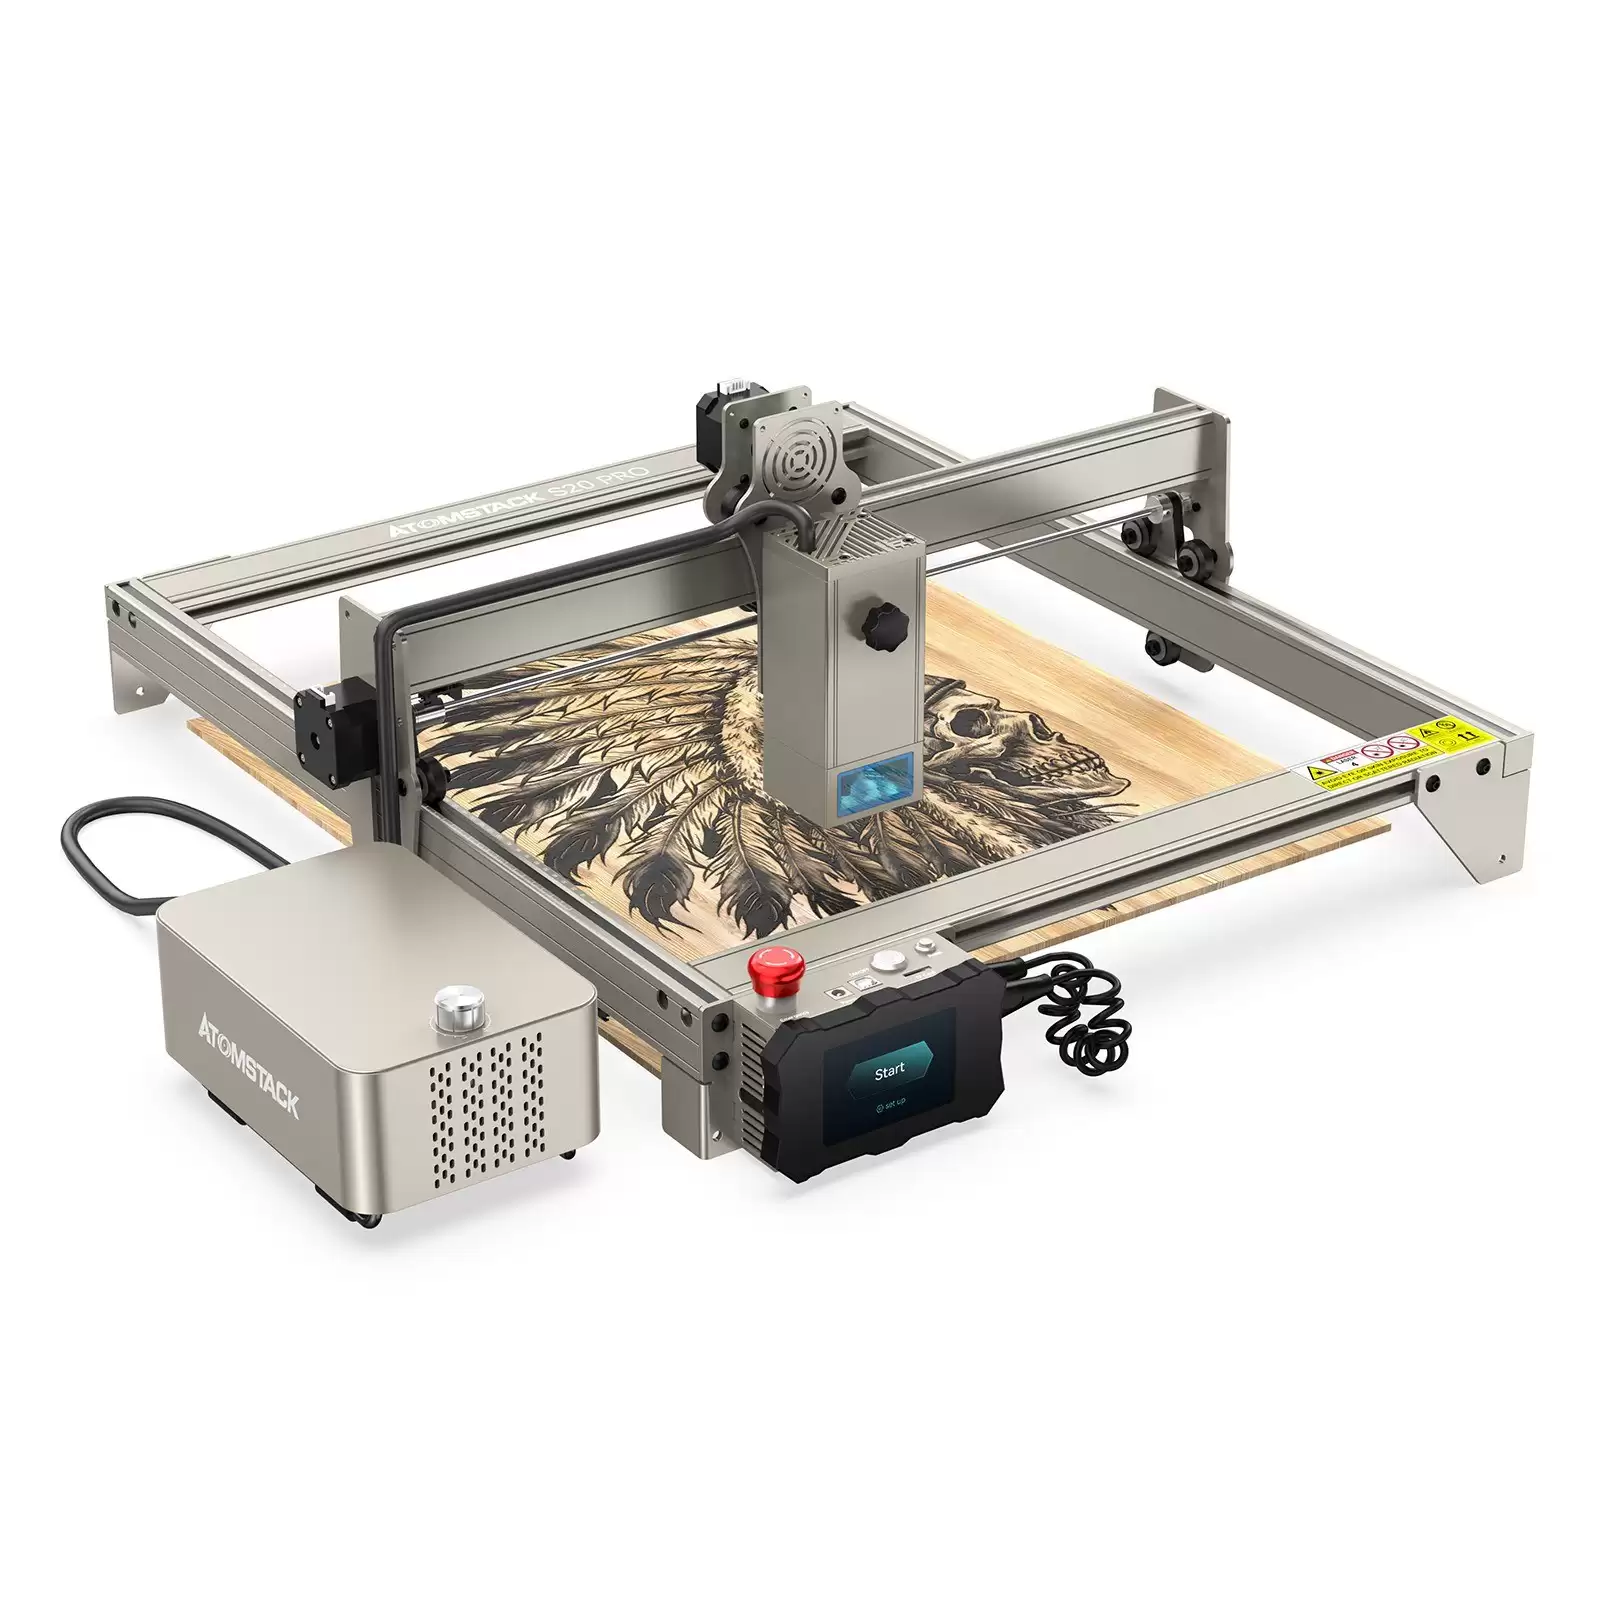 Order In Just $519 Atomstack S20 Pro 20w Laser Engraving Cutting Machine With Air Assist Accessory With This Discount Coupon At Tomtop